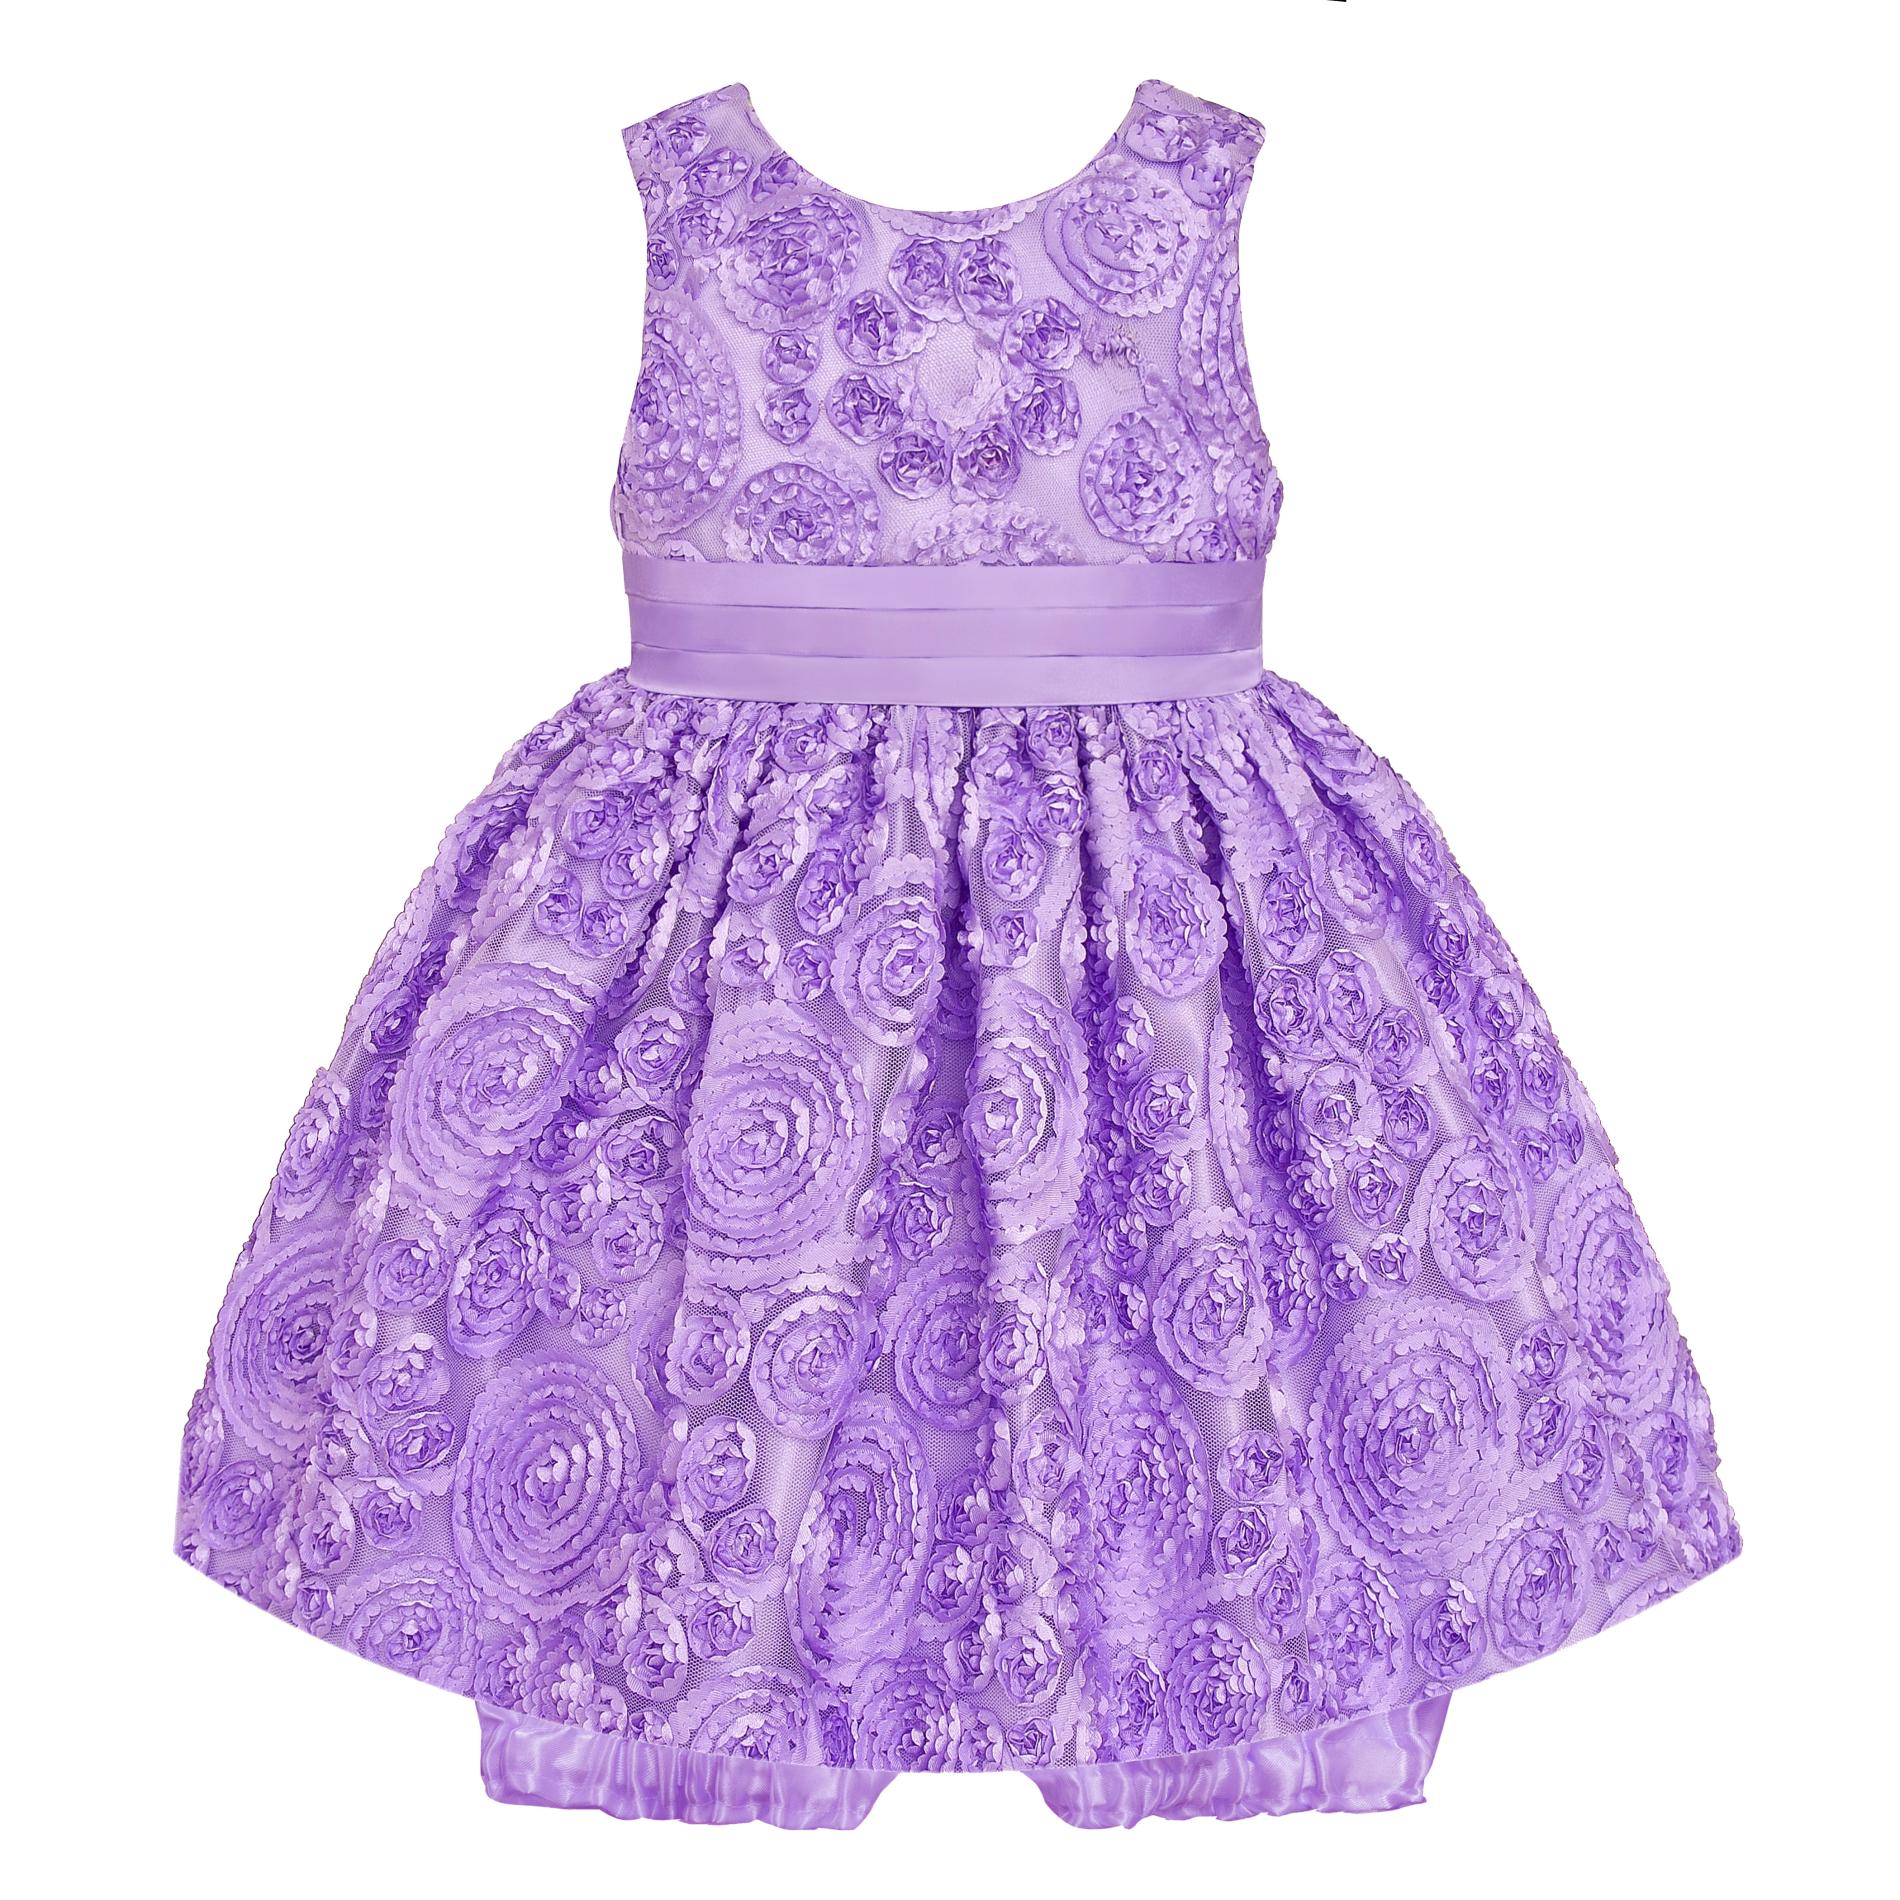 American Princess Infant & Toddler Girl's Ribbon-Embellished Party Dress & Diaper Cover - Swirls